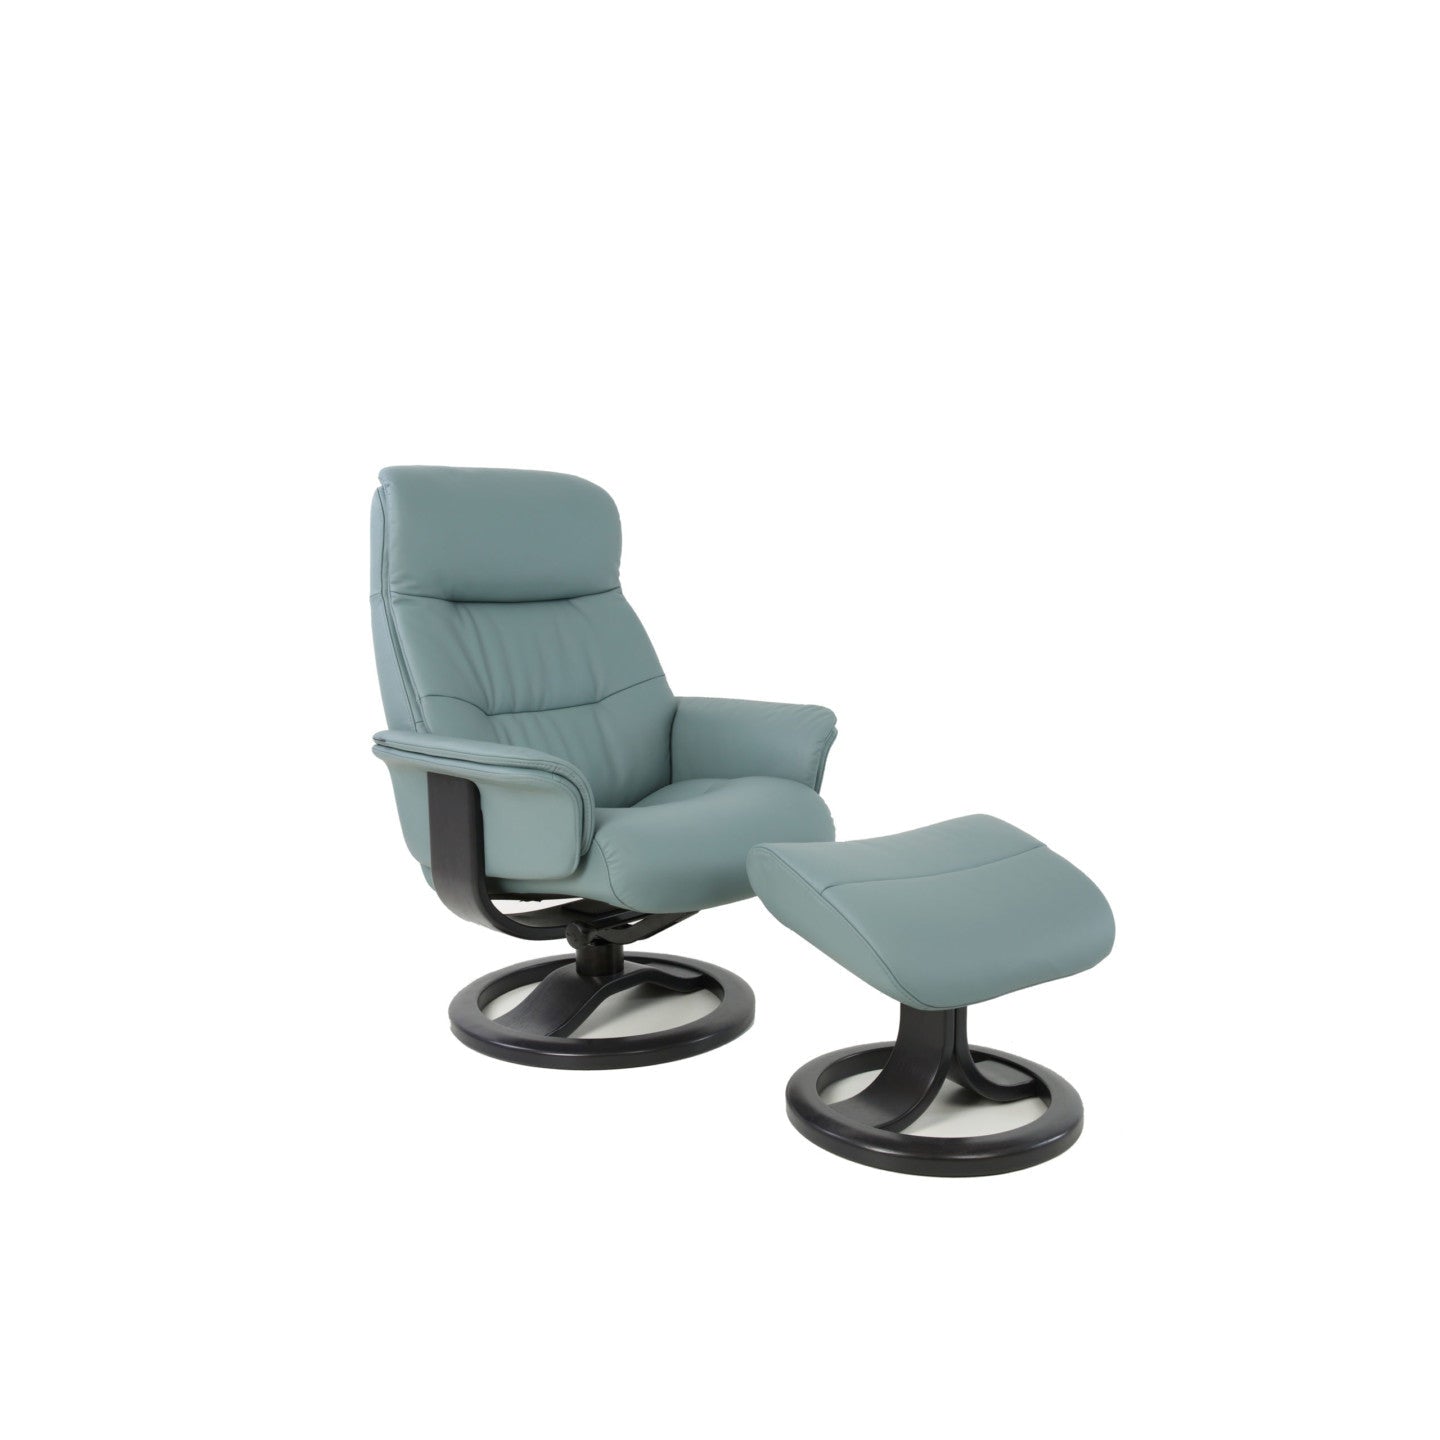 Fjords, Anne R Small Recliner with Footstool